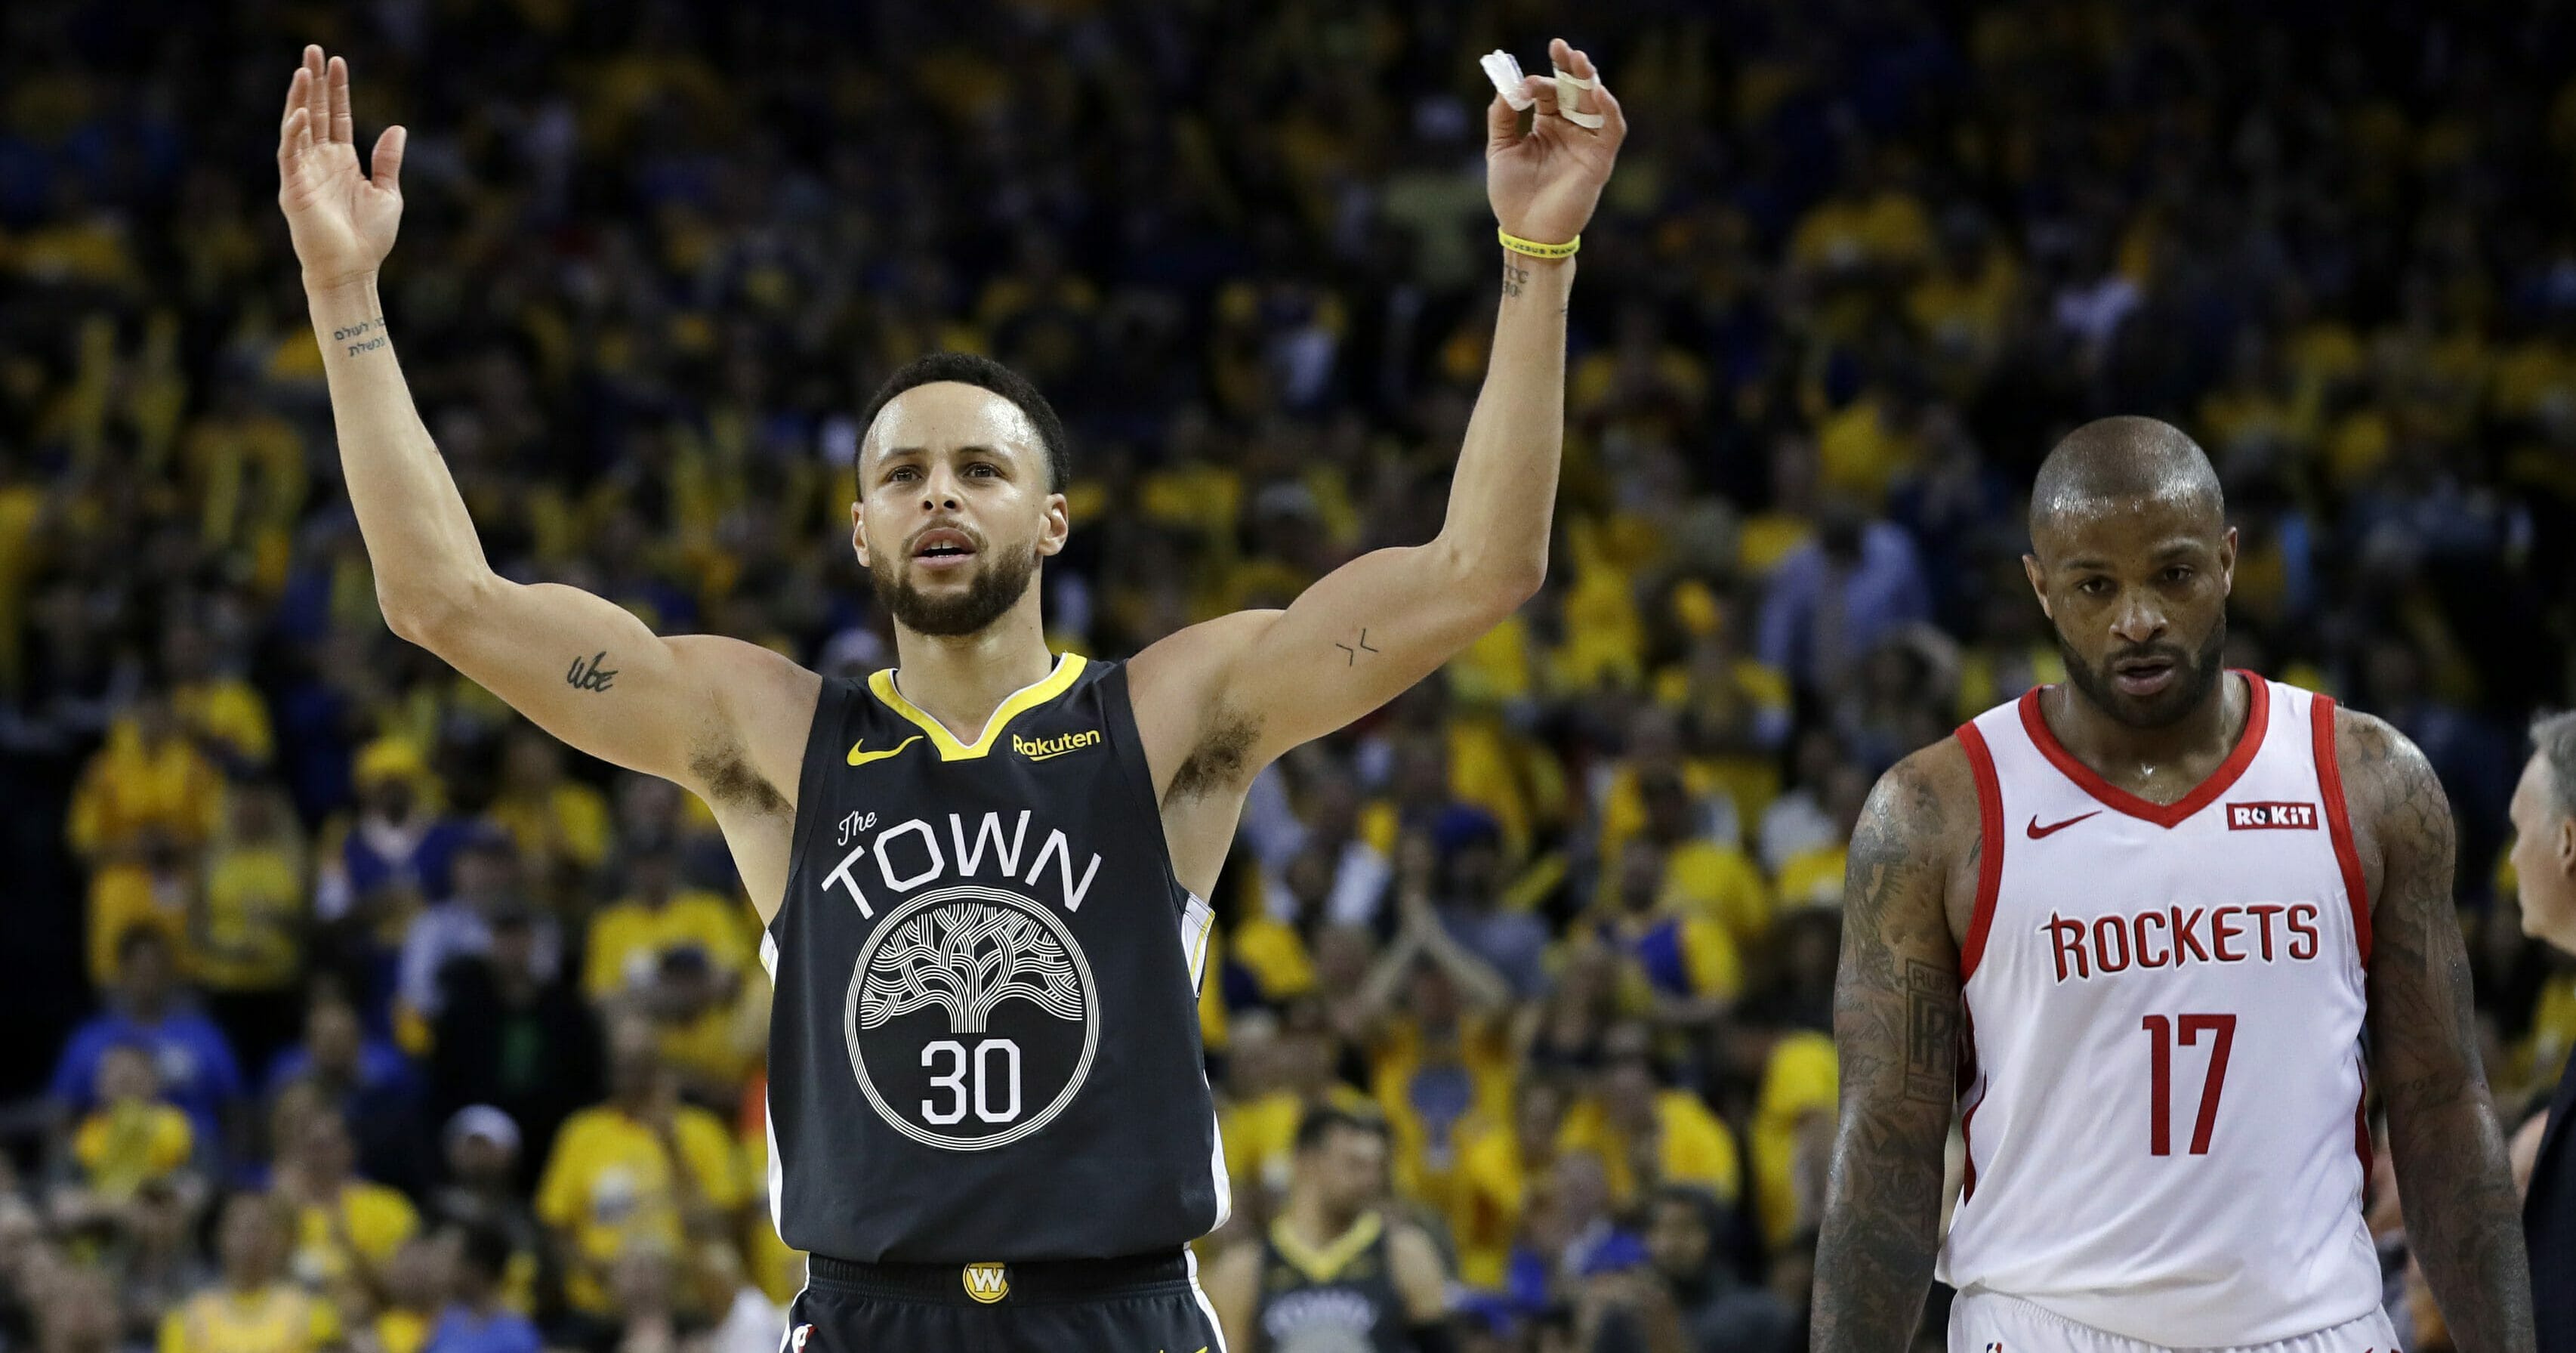 The Golden State Warriors' Stephen Curry, left, celebrates next to the Houston Rockets' P.J. Tucker.